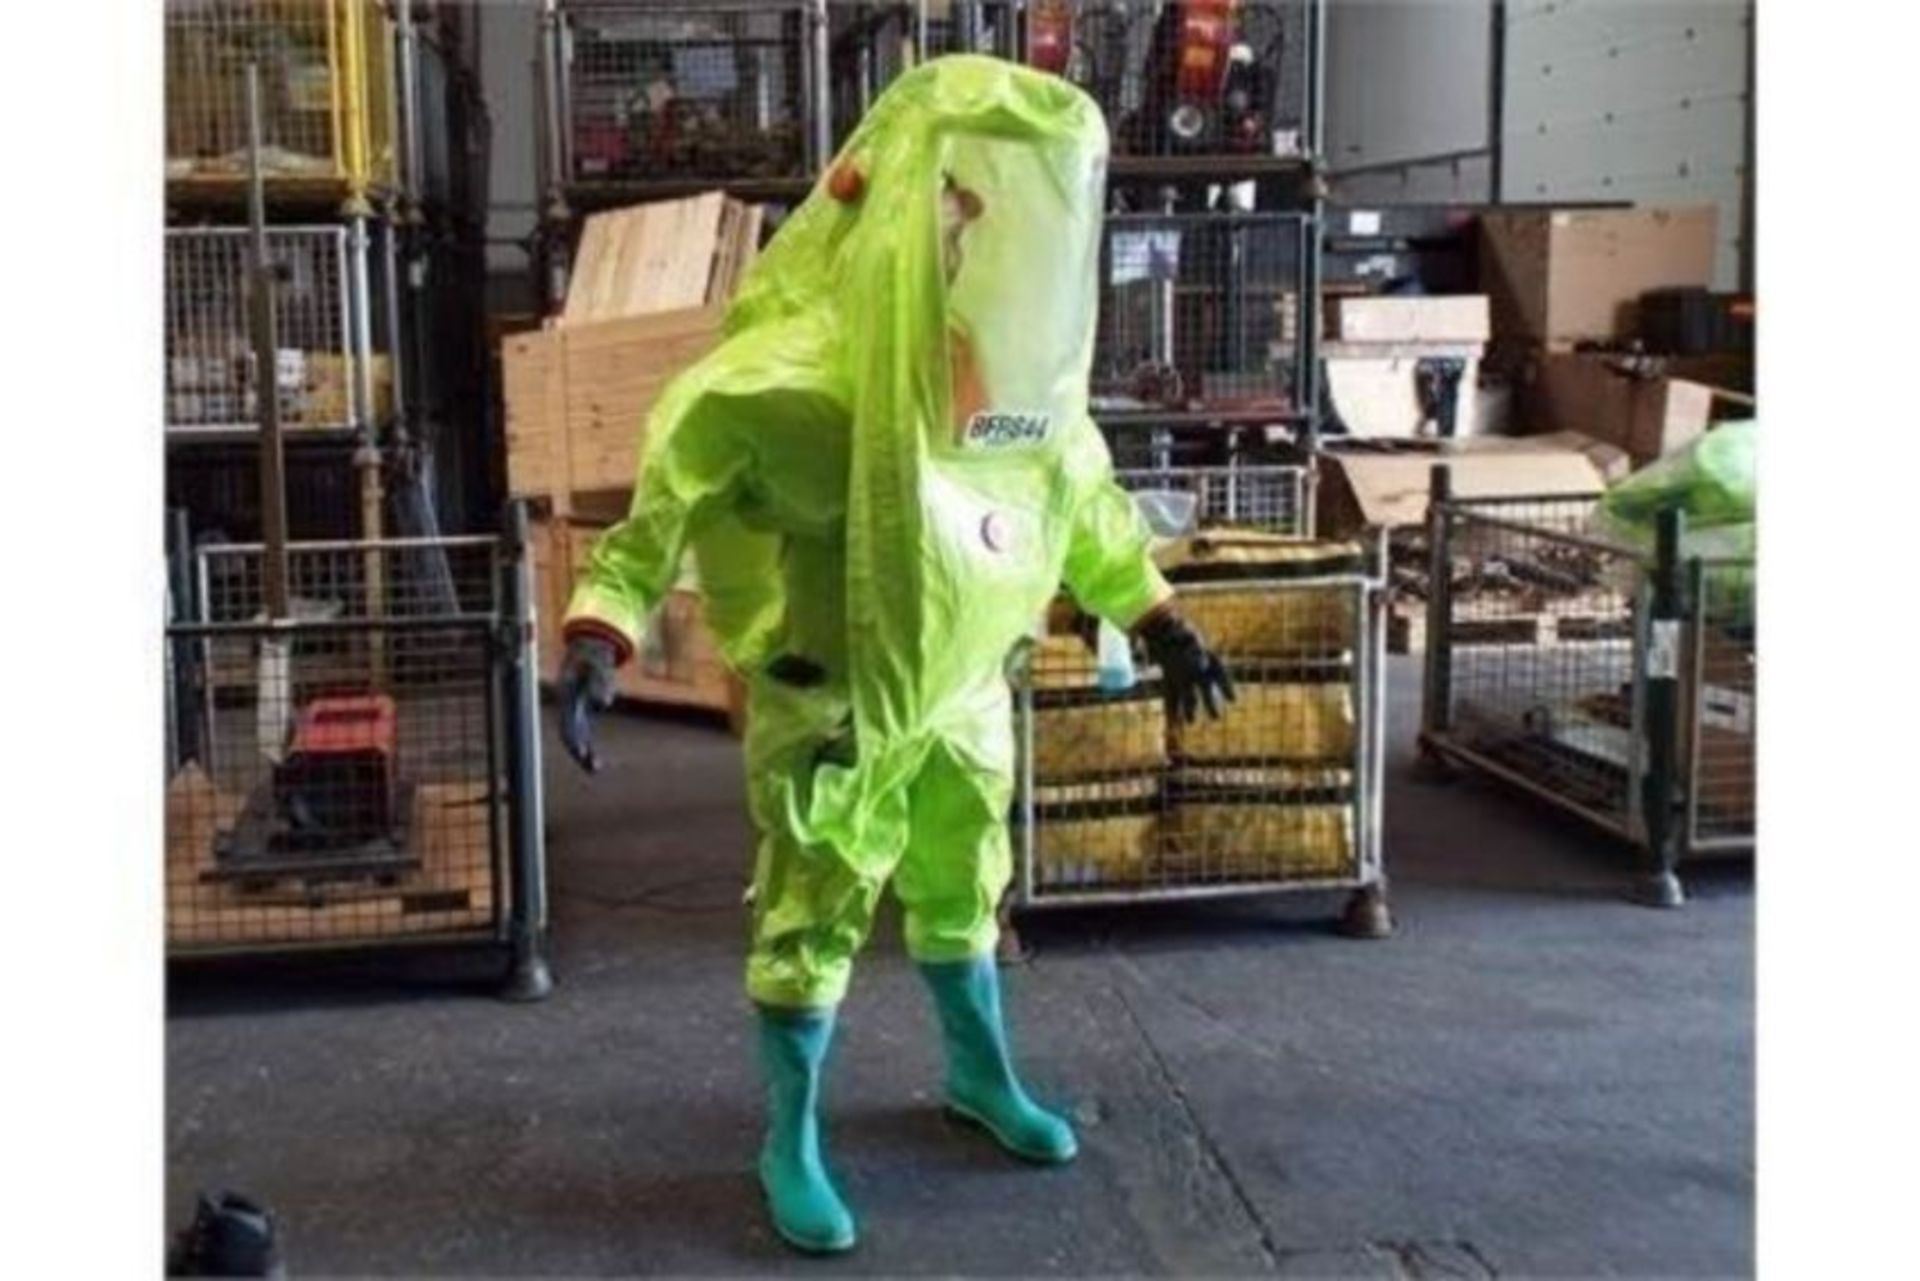 10 x Respirex Tychem TK Gas-Tight Hazmat Suit Type 1A with Attached Boots and Gloves - Image 2 of 9